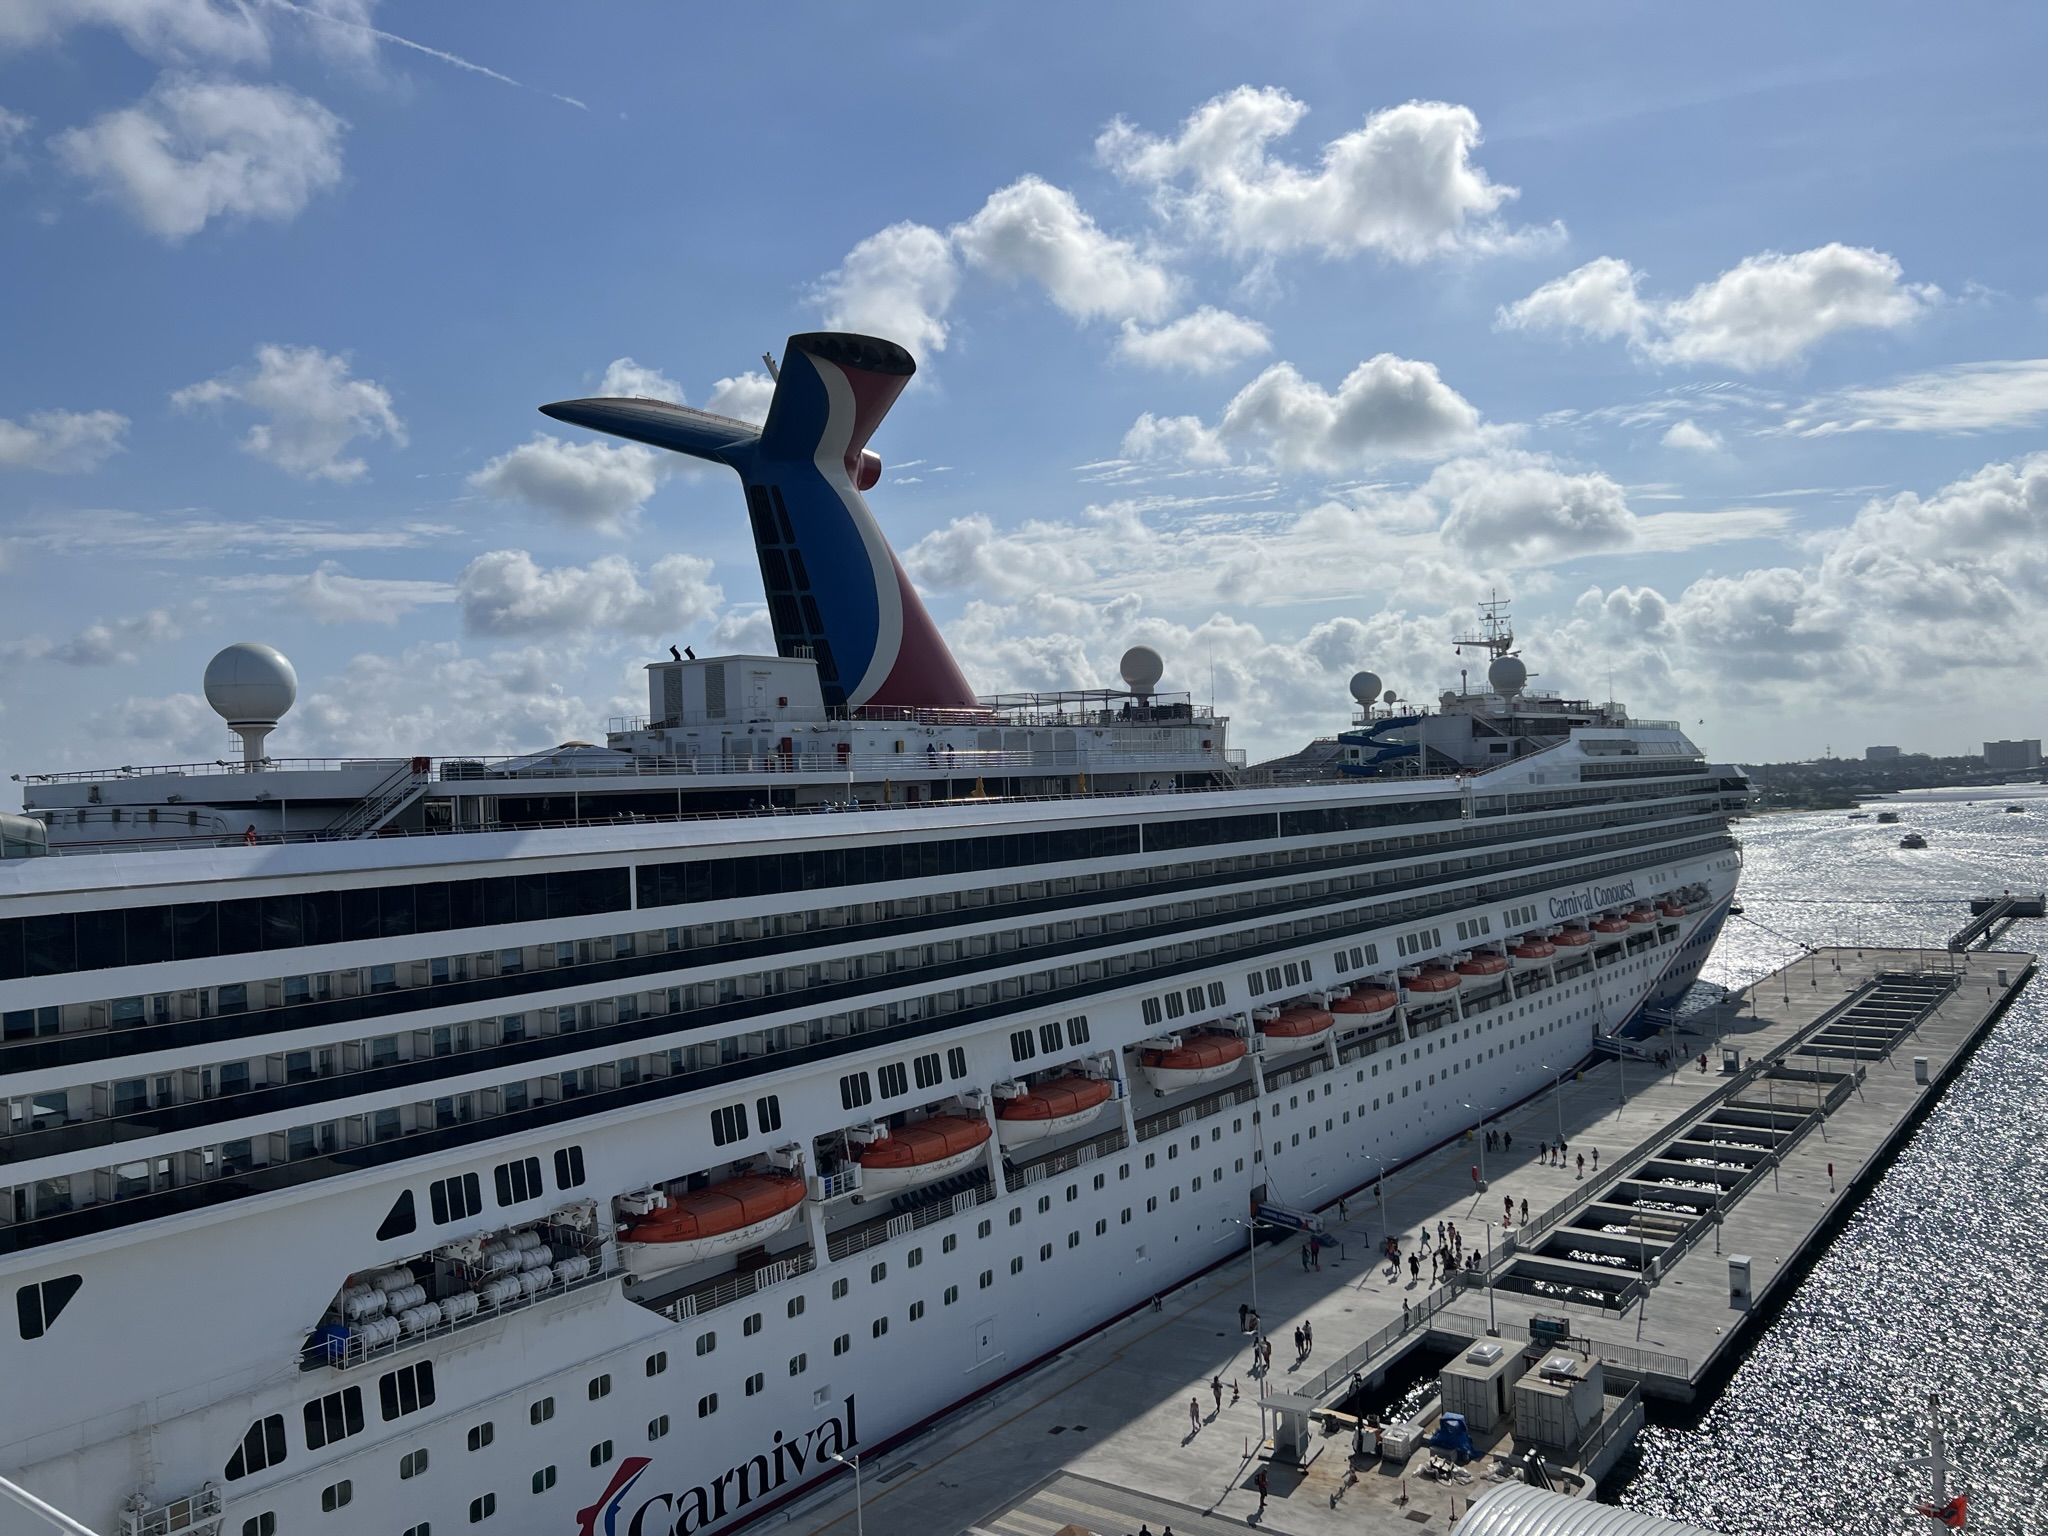 Cruise Ship Shorts – Cruise Ship Carnival Conquest Leaves the Port of Nassau to Head to Home Port